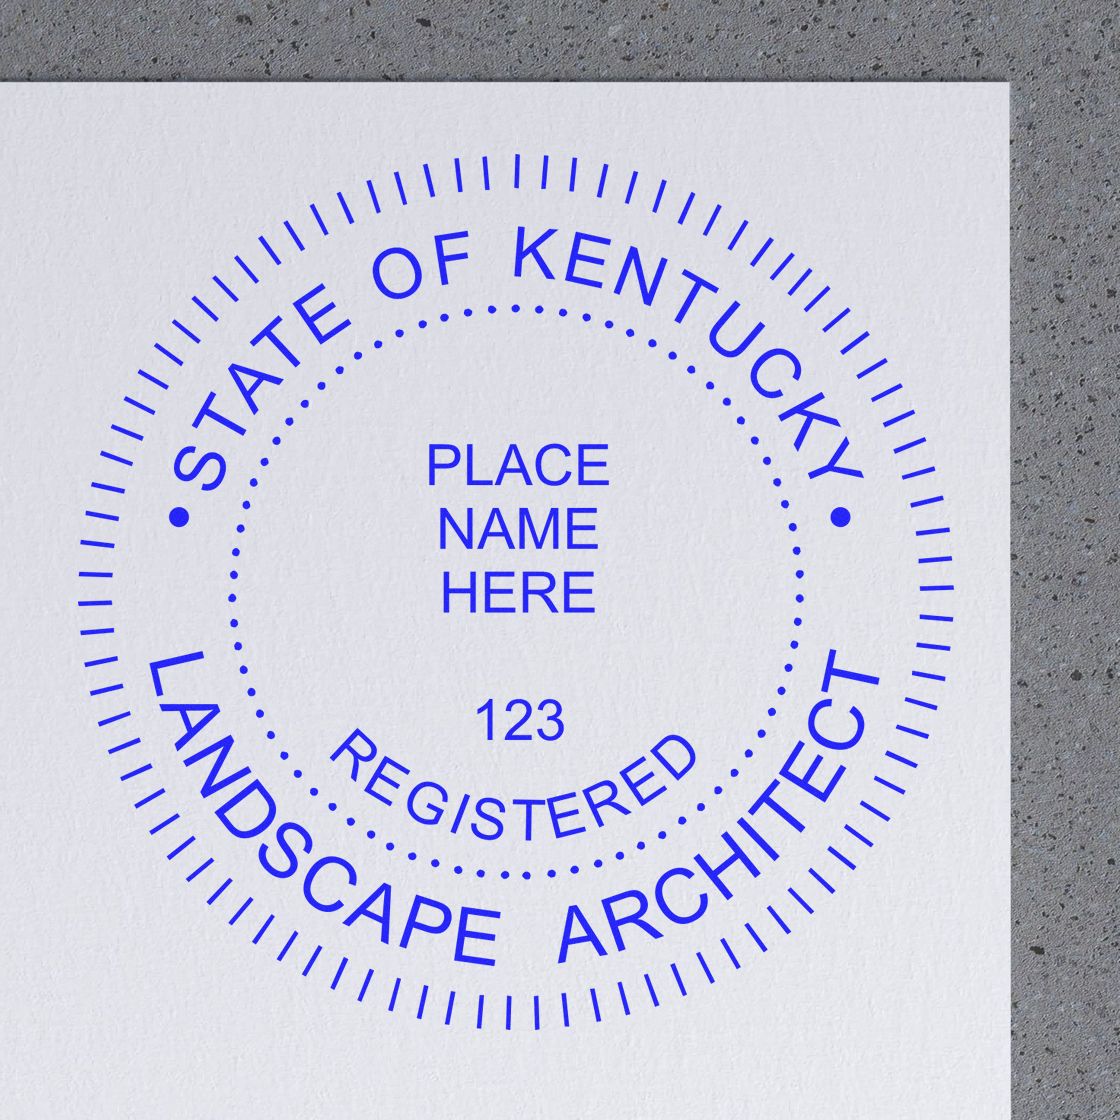 The Digital Kentucky Landscape Architect Stamp stamp impression comes to life with a crisp, detailed photo on paper - showcasing true professional quality.